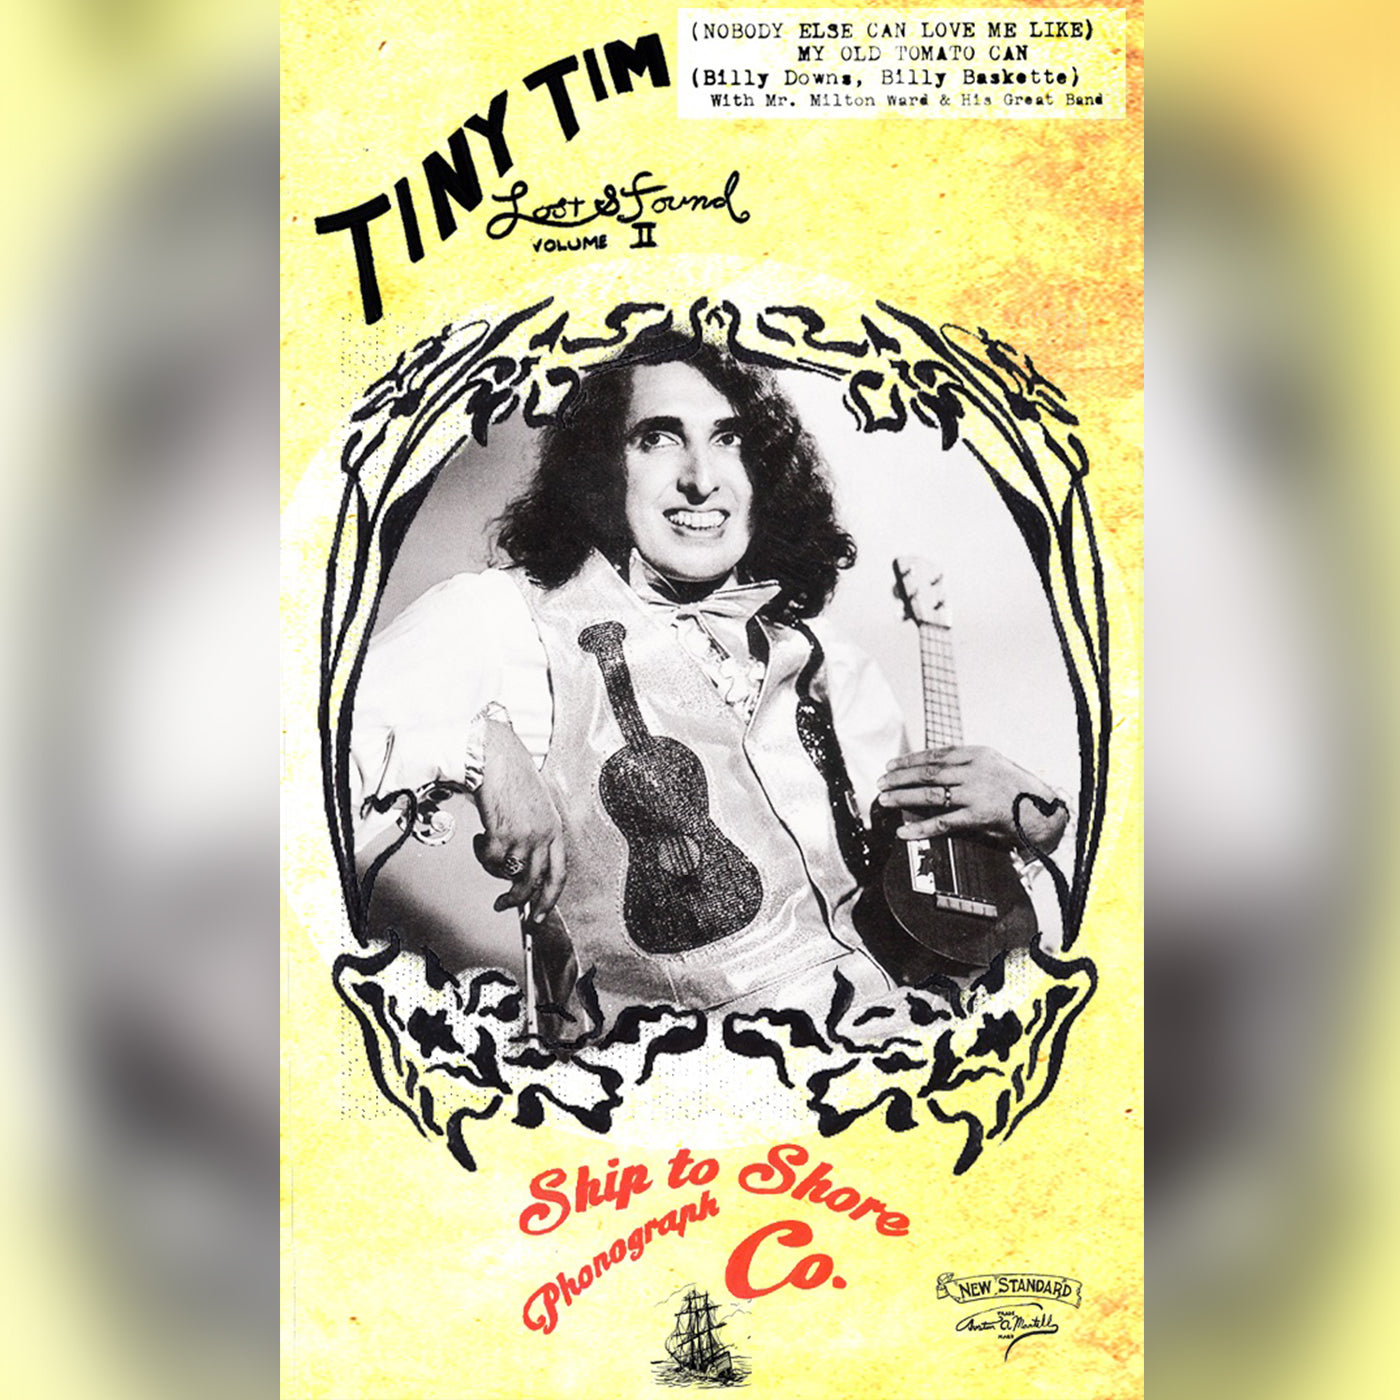 Tiny Tim - (Nobody Else Can Love Me Like) My Old Tomato Can